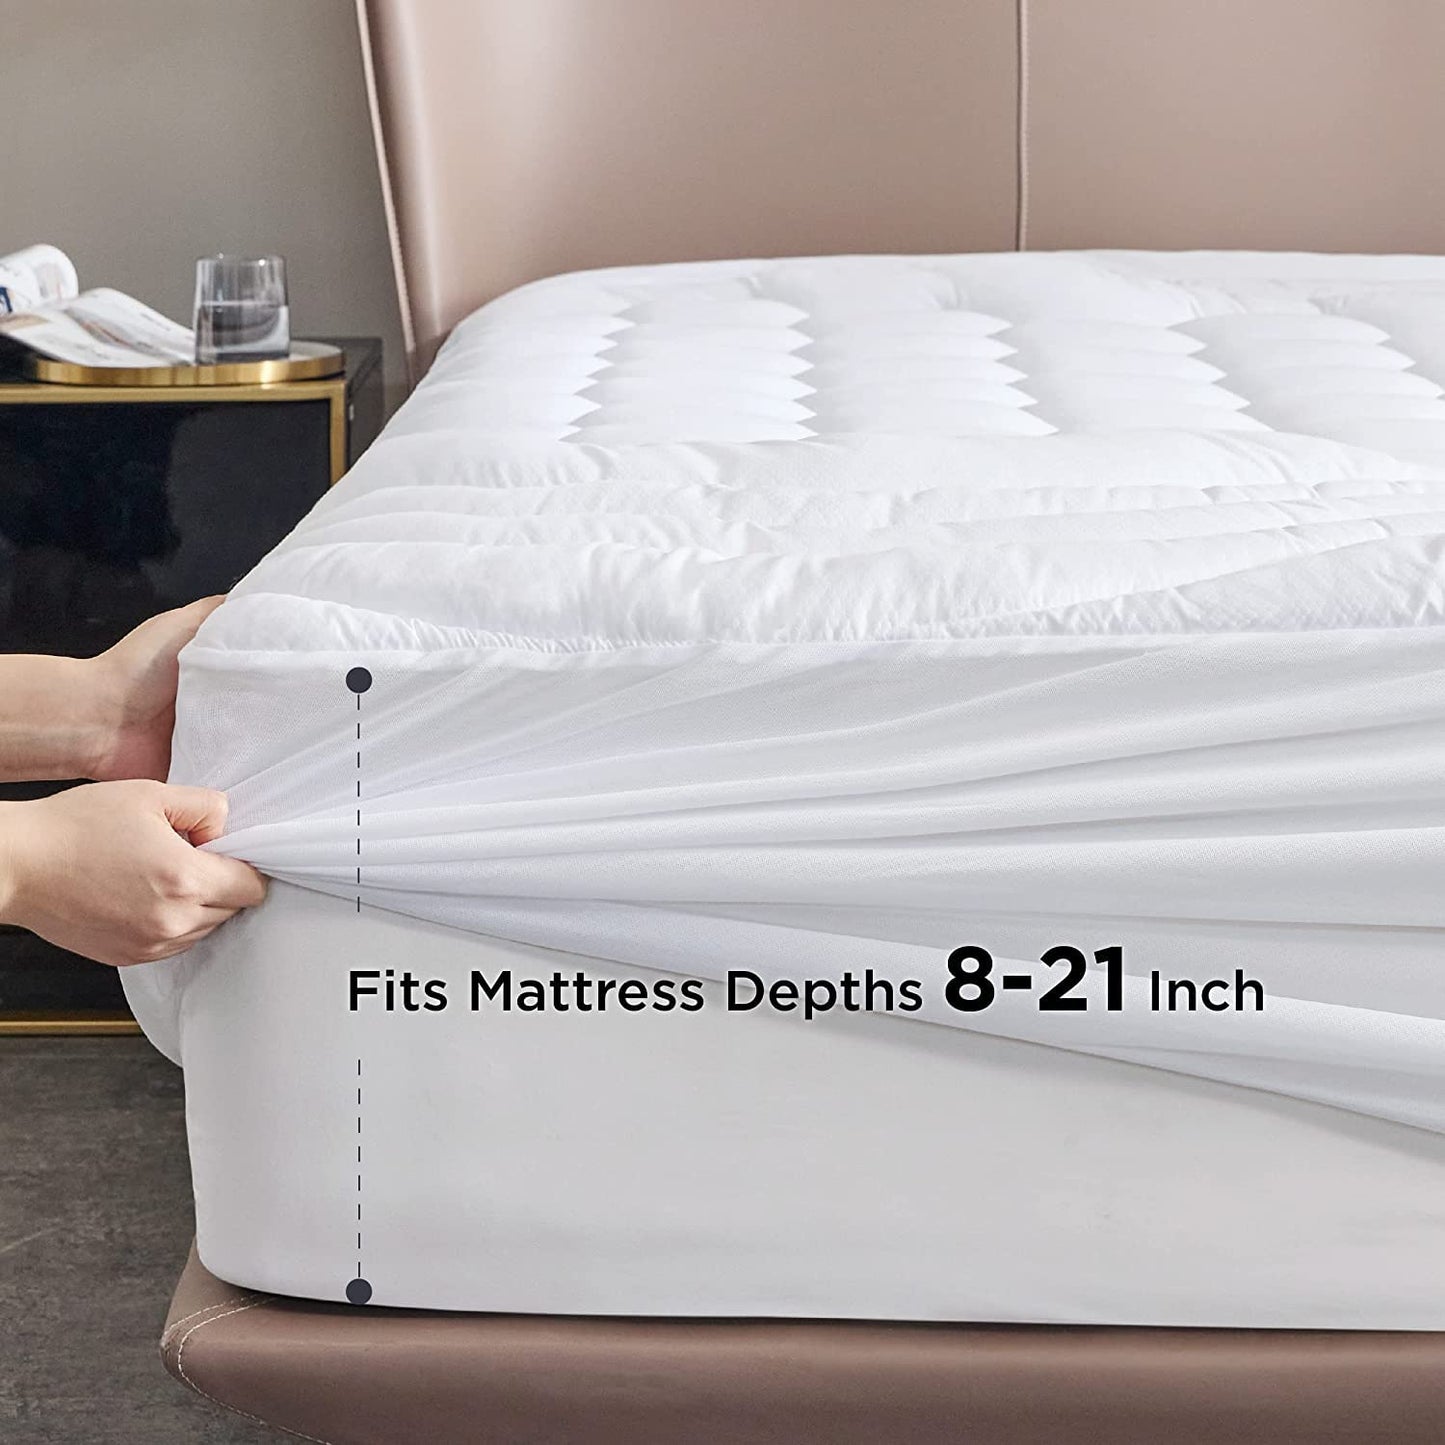 Bedsure Queen Size Mattress Pad - Soft Mattress Cover Padded, Quilted Fitted Mattress Protector with 8-21" Deep Pocket, Breathable Fluffy Pillow Top, White, 60x80 Inches